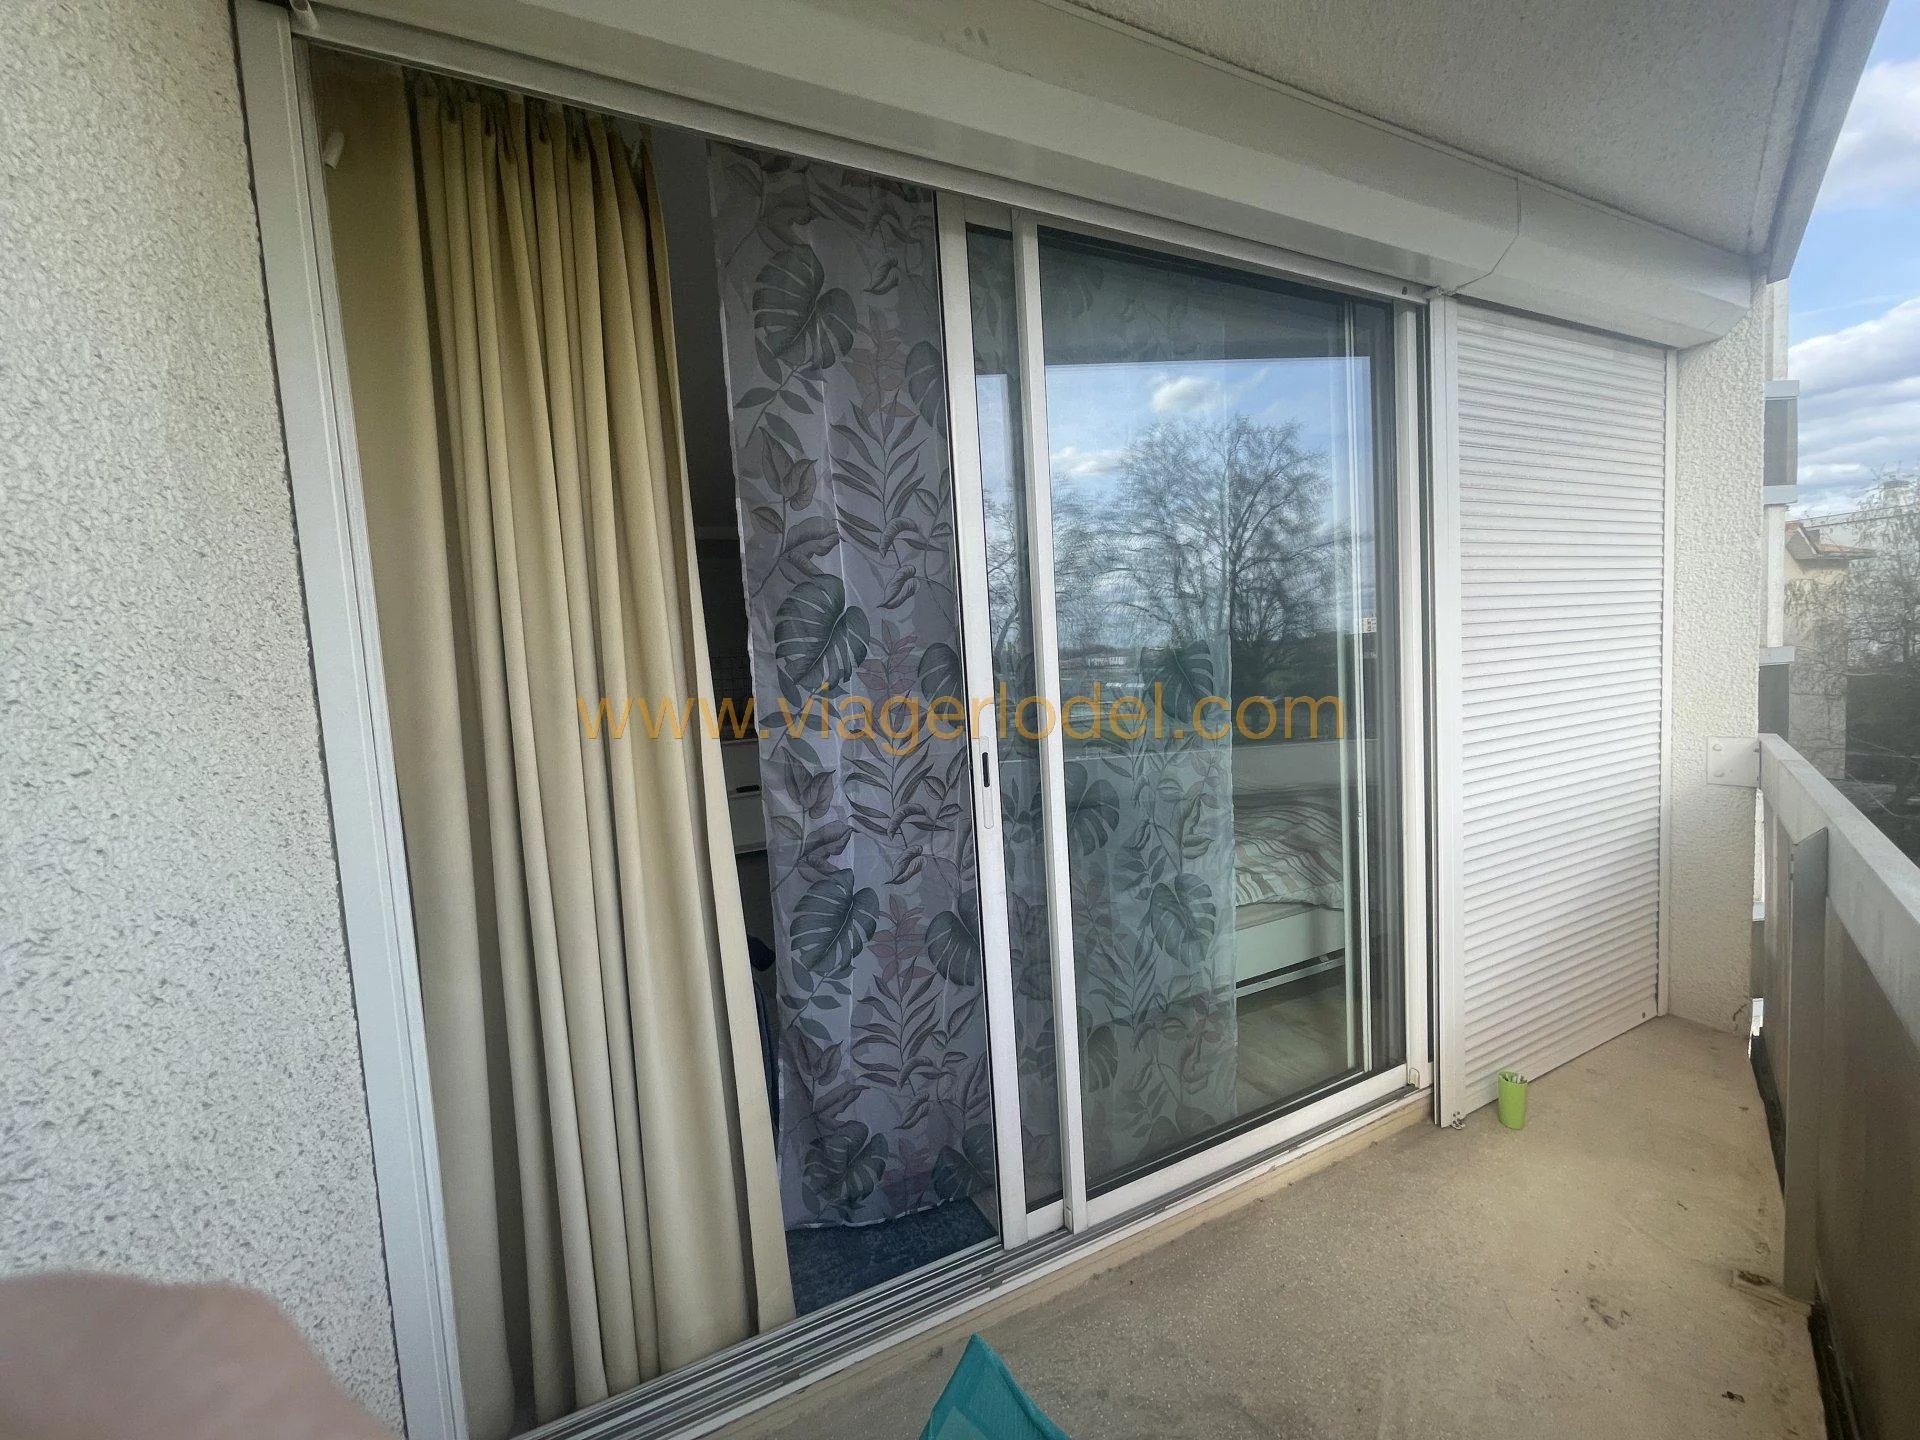 Ref.: 9064 - LIFE ANNUITY - BORDEAUX (33) -  Rented 1-room apartmeent